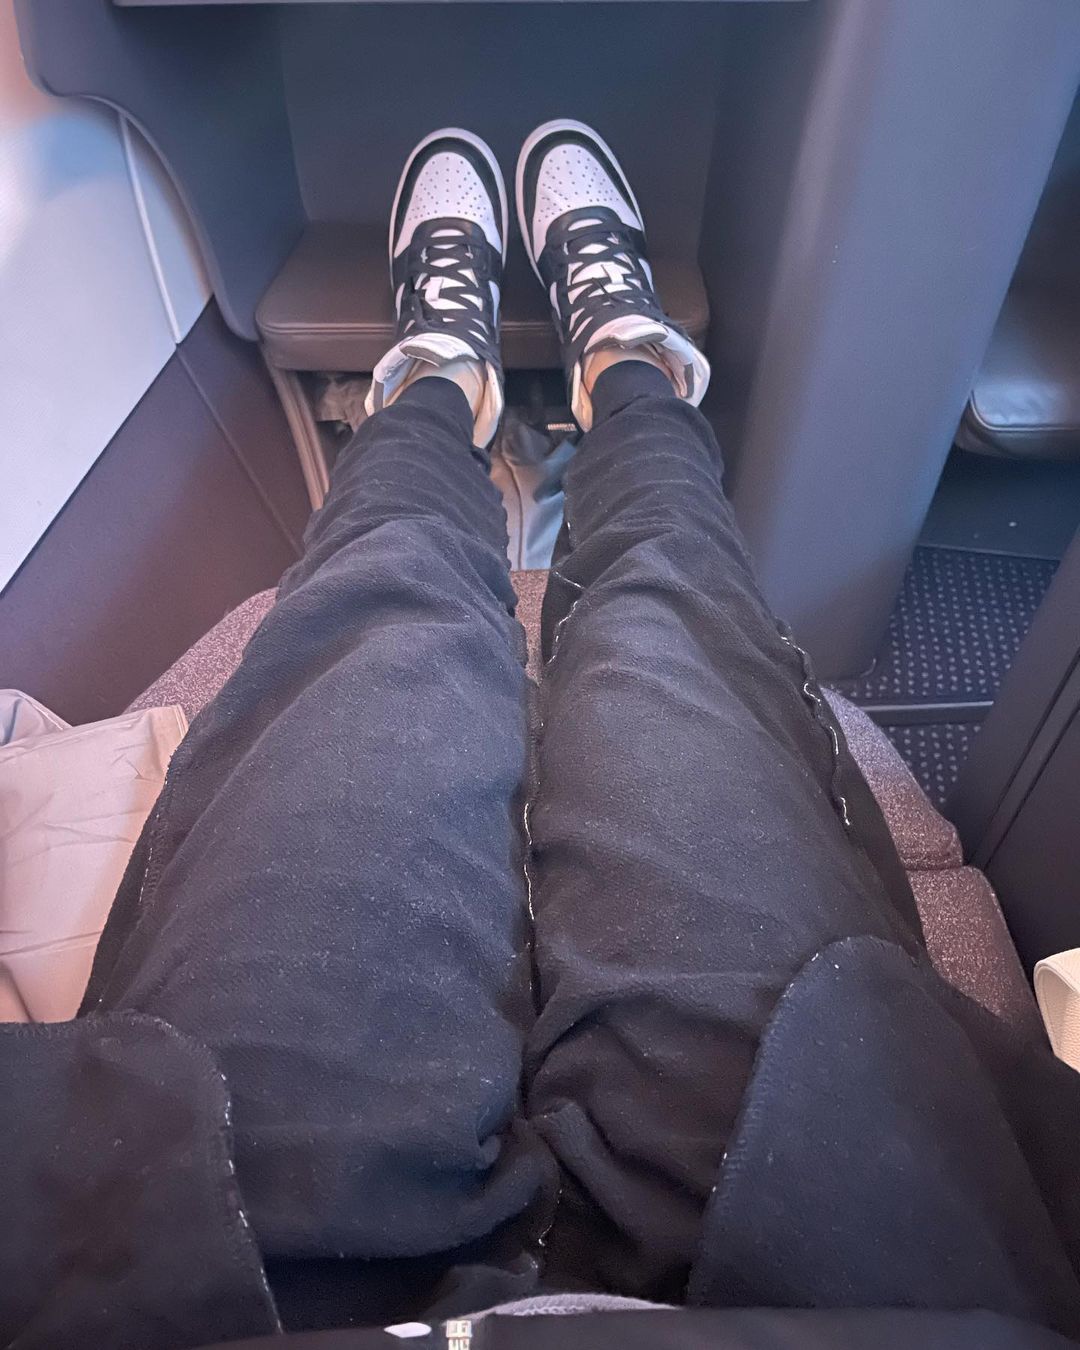 South Korean DJ kicked off American Airlines flight for wearing pants ...